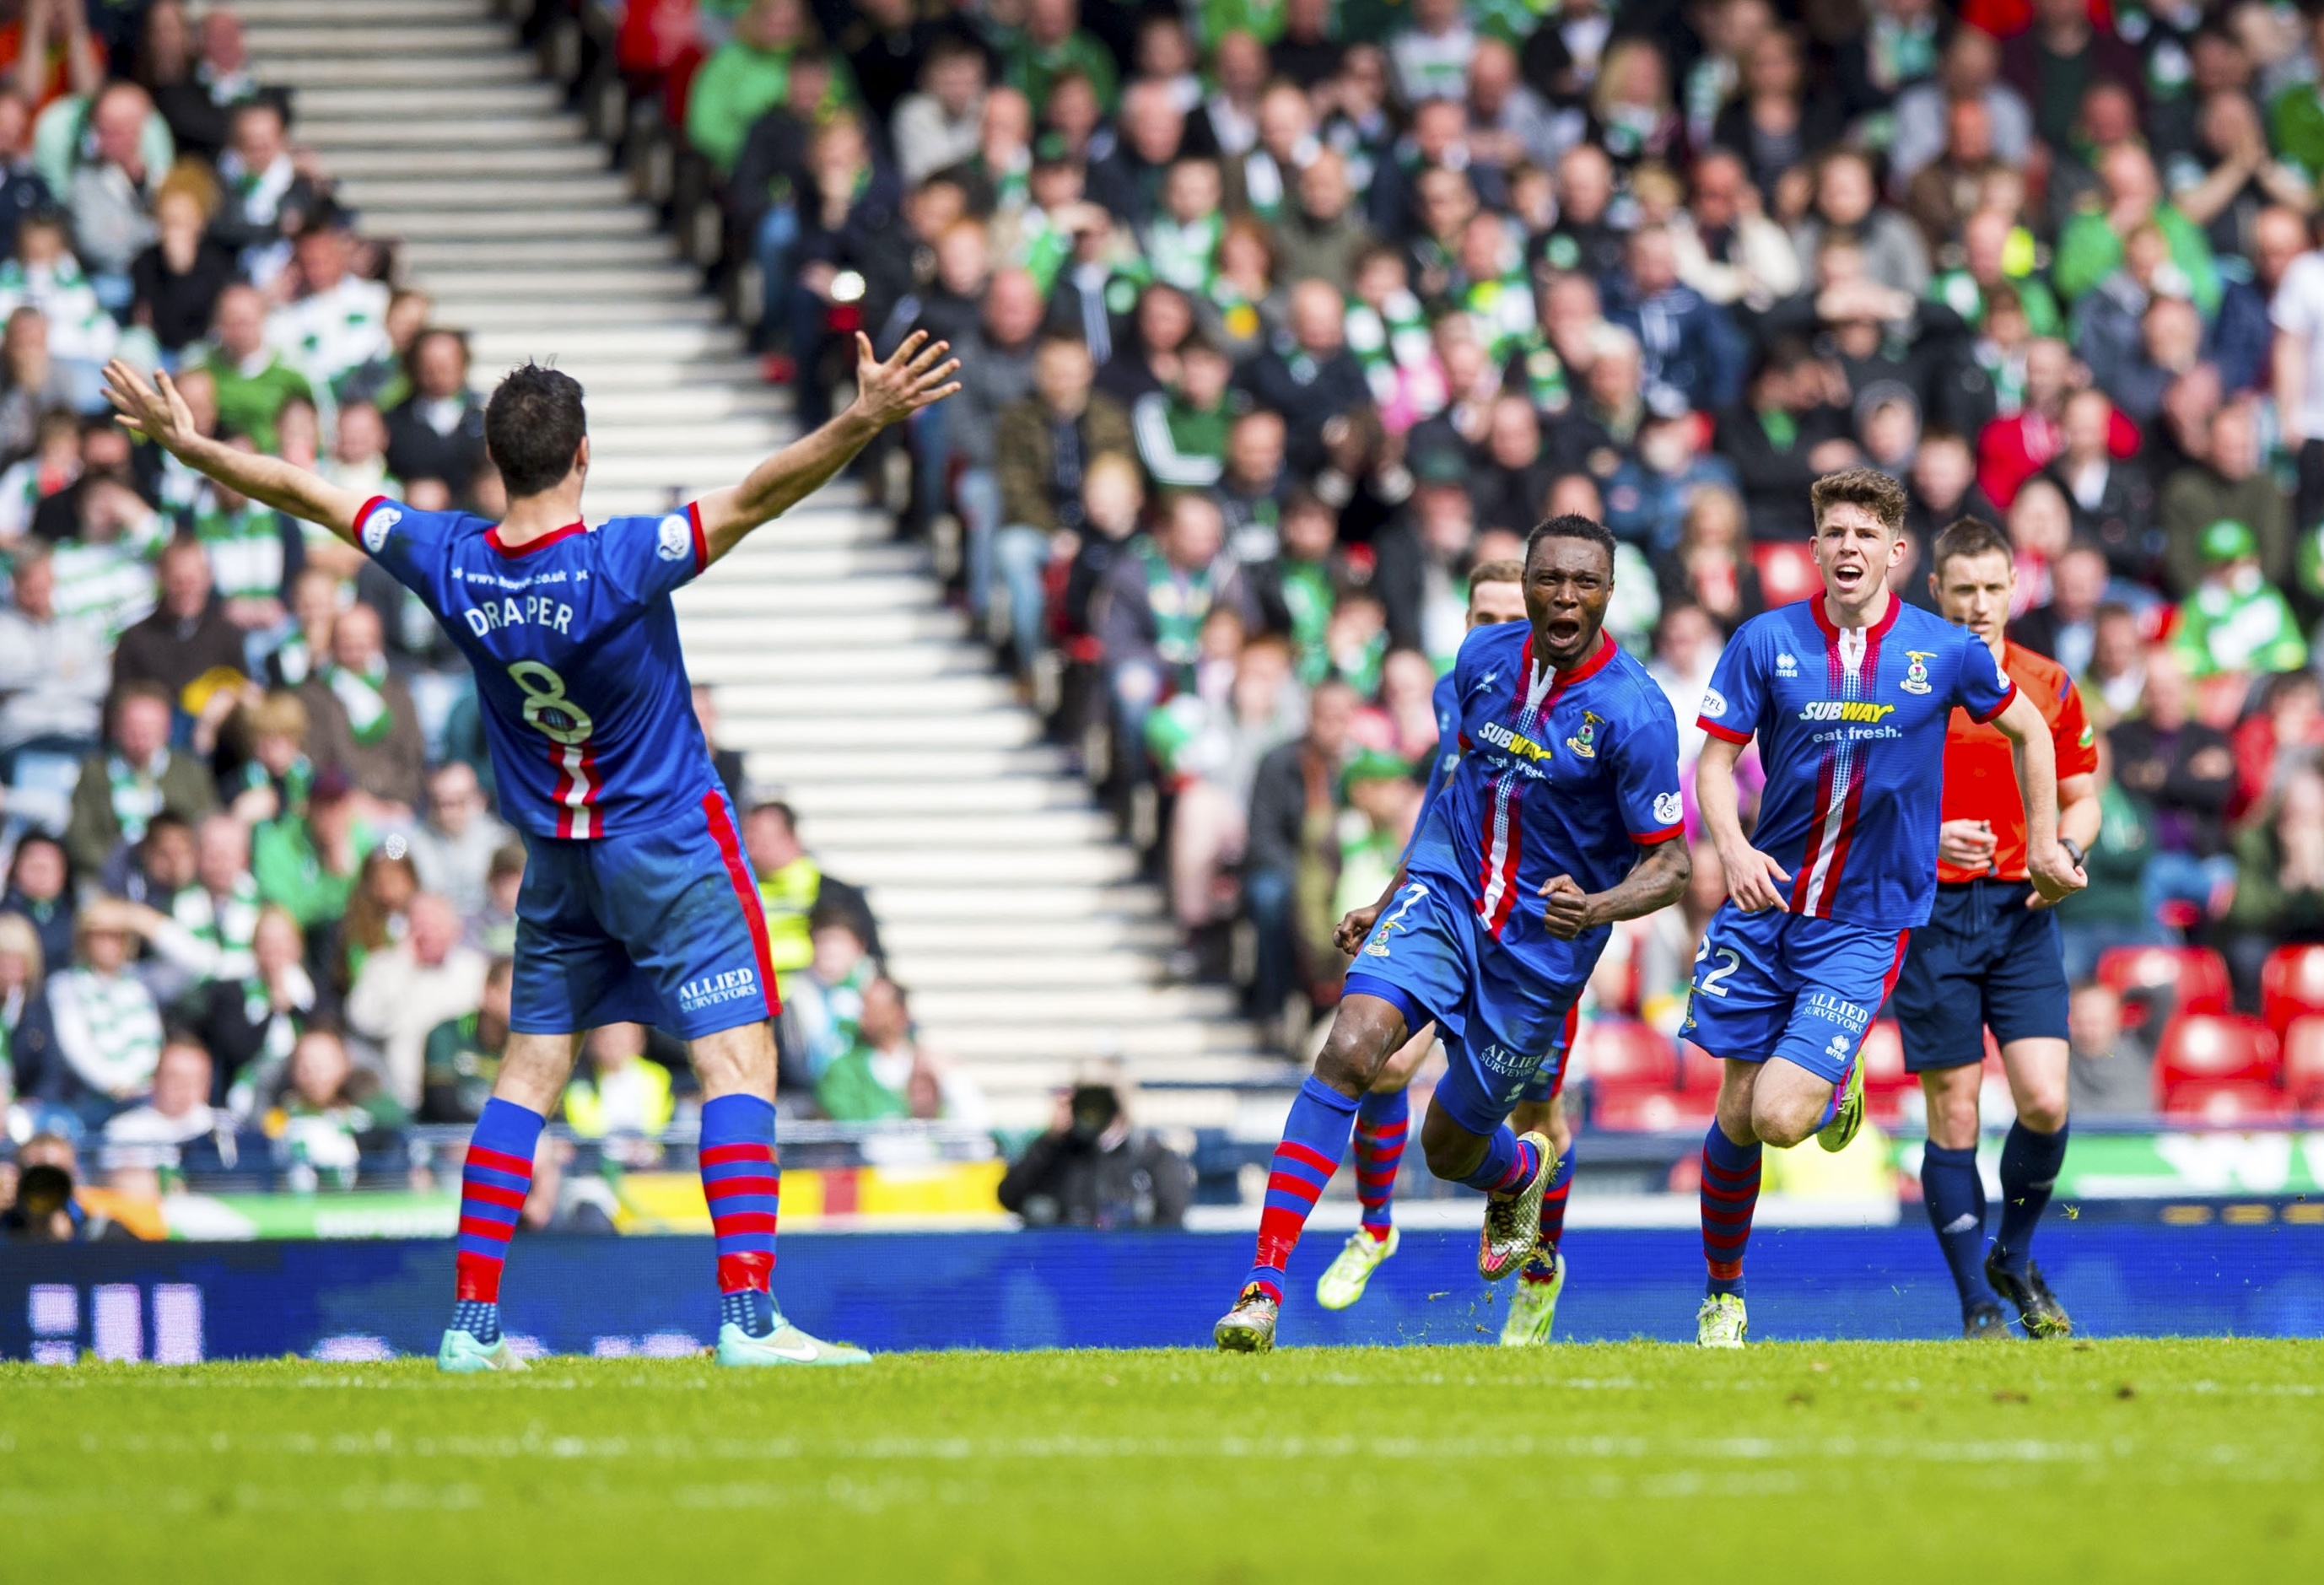 Caley Thistle celebrate Ofere's goal